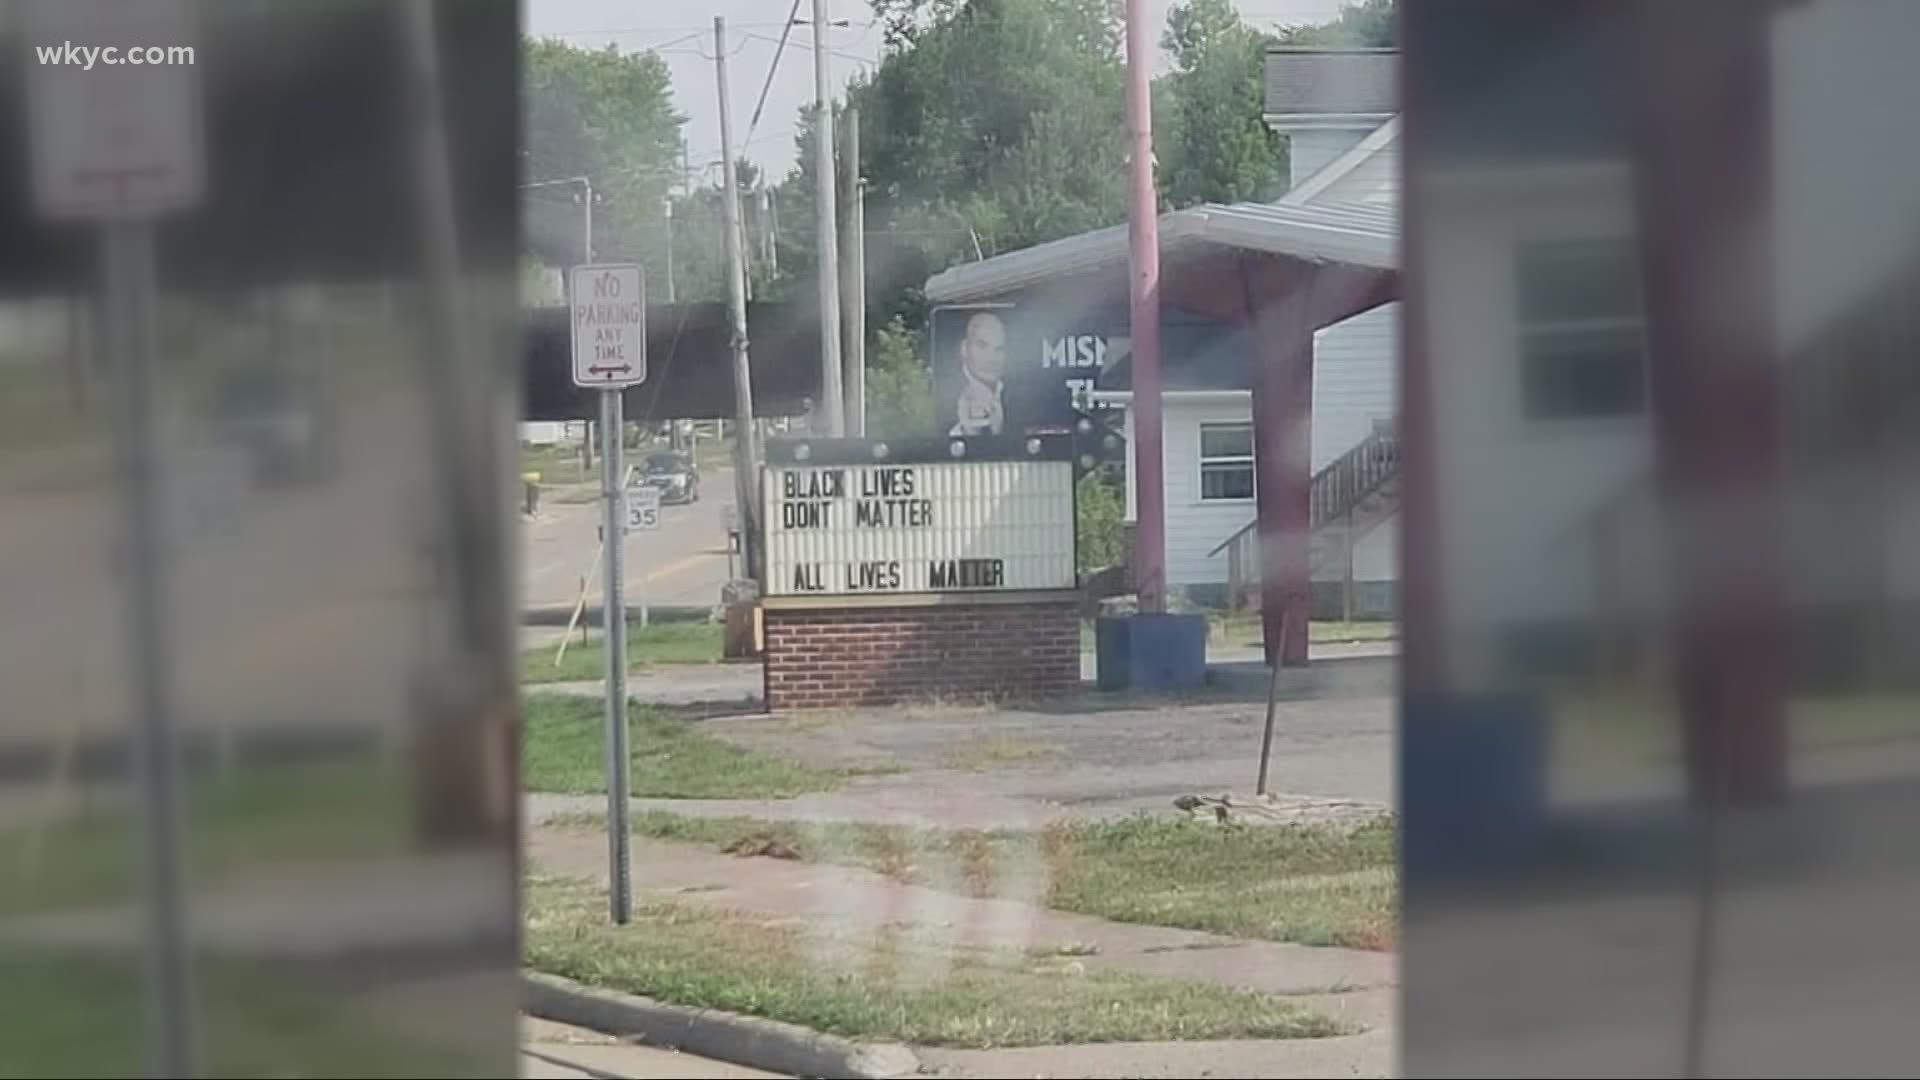 Dinner Bell Drive-In on Lake Avenue is being met with serious back lash over and alleged racist sign. Tiffany Tarpley has the latest on this story.